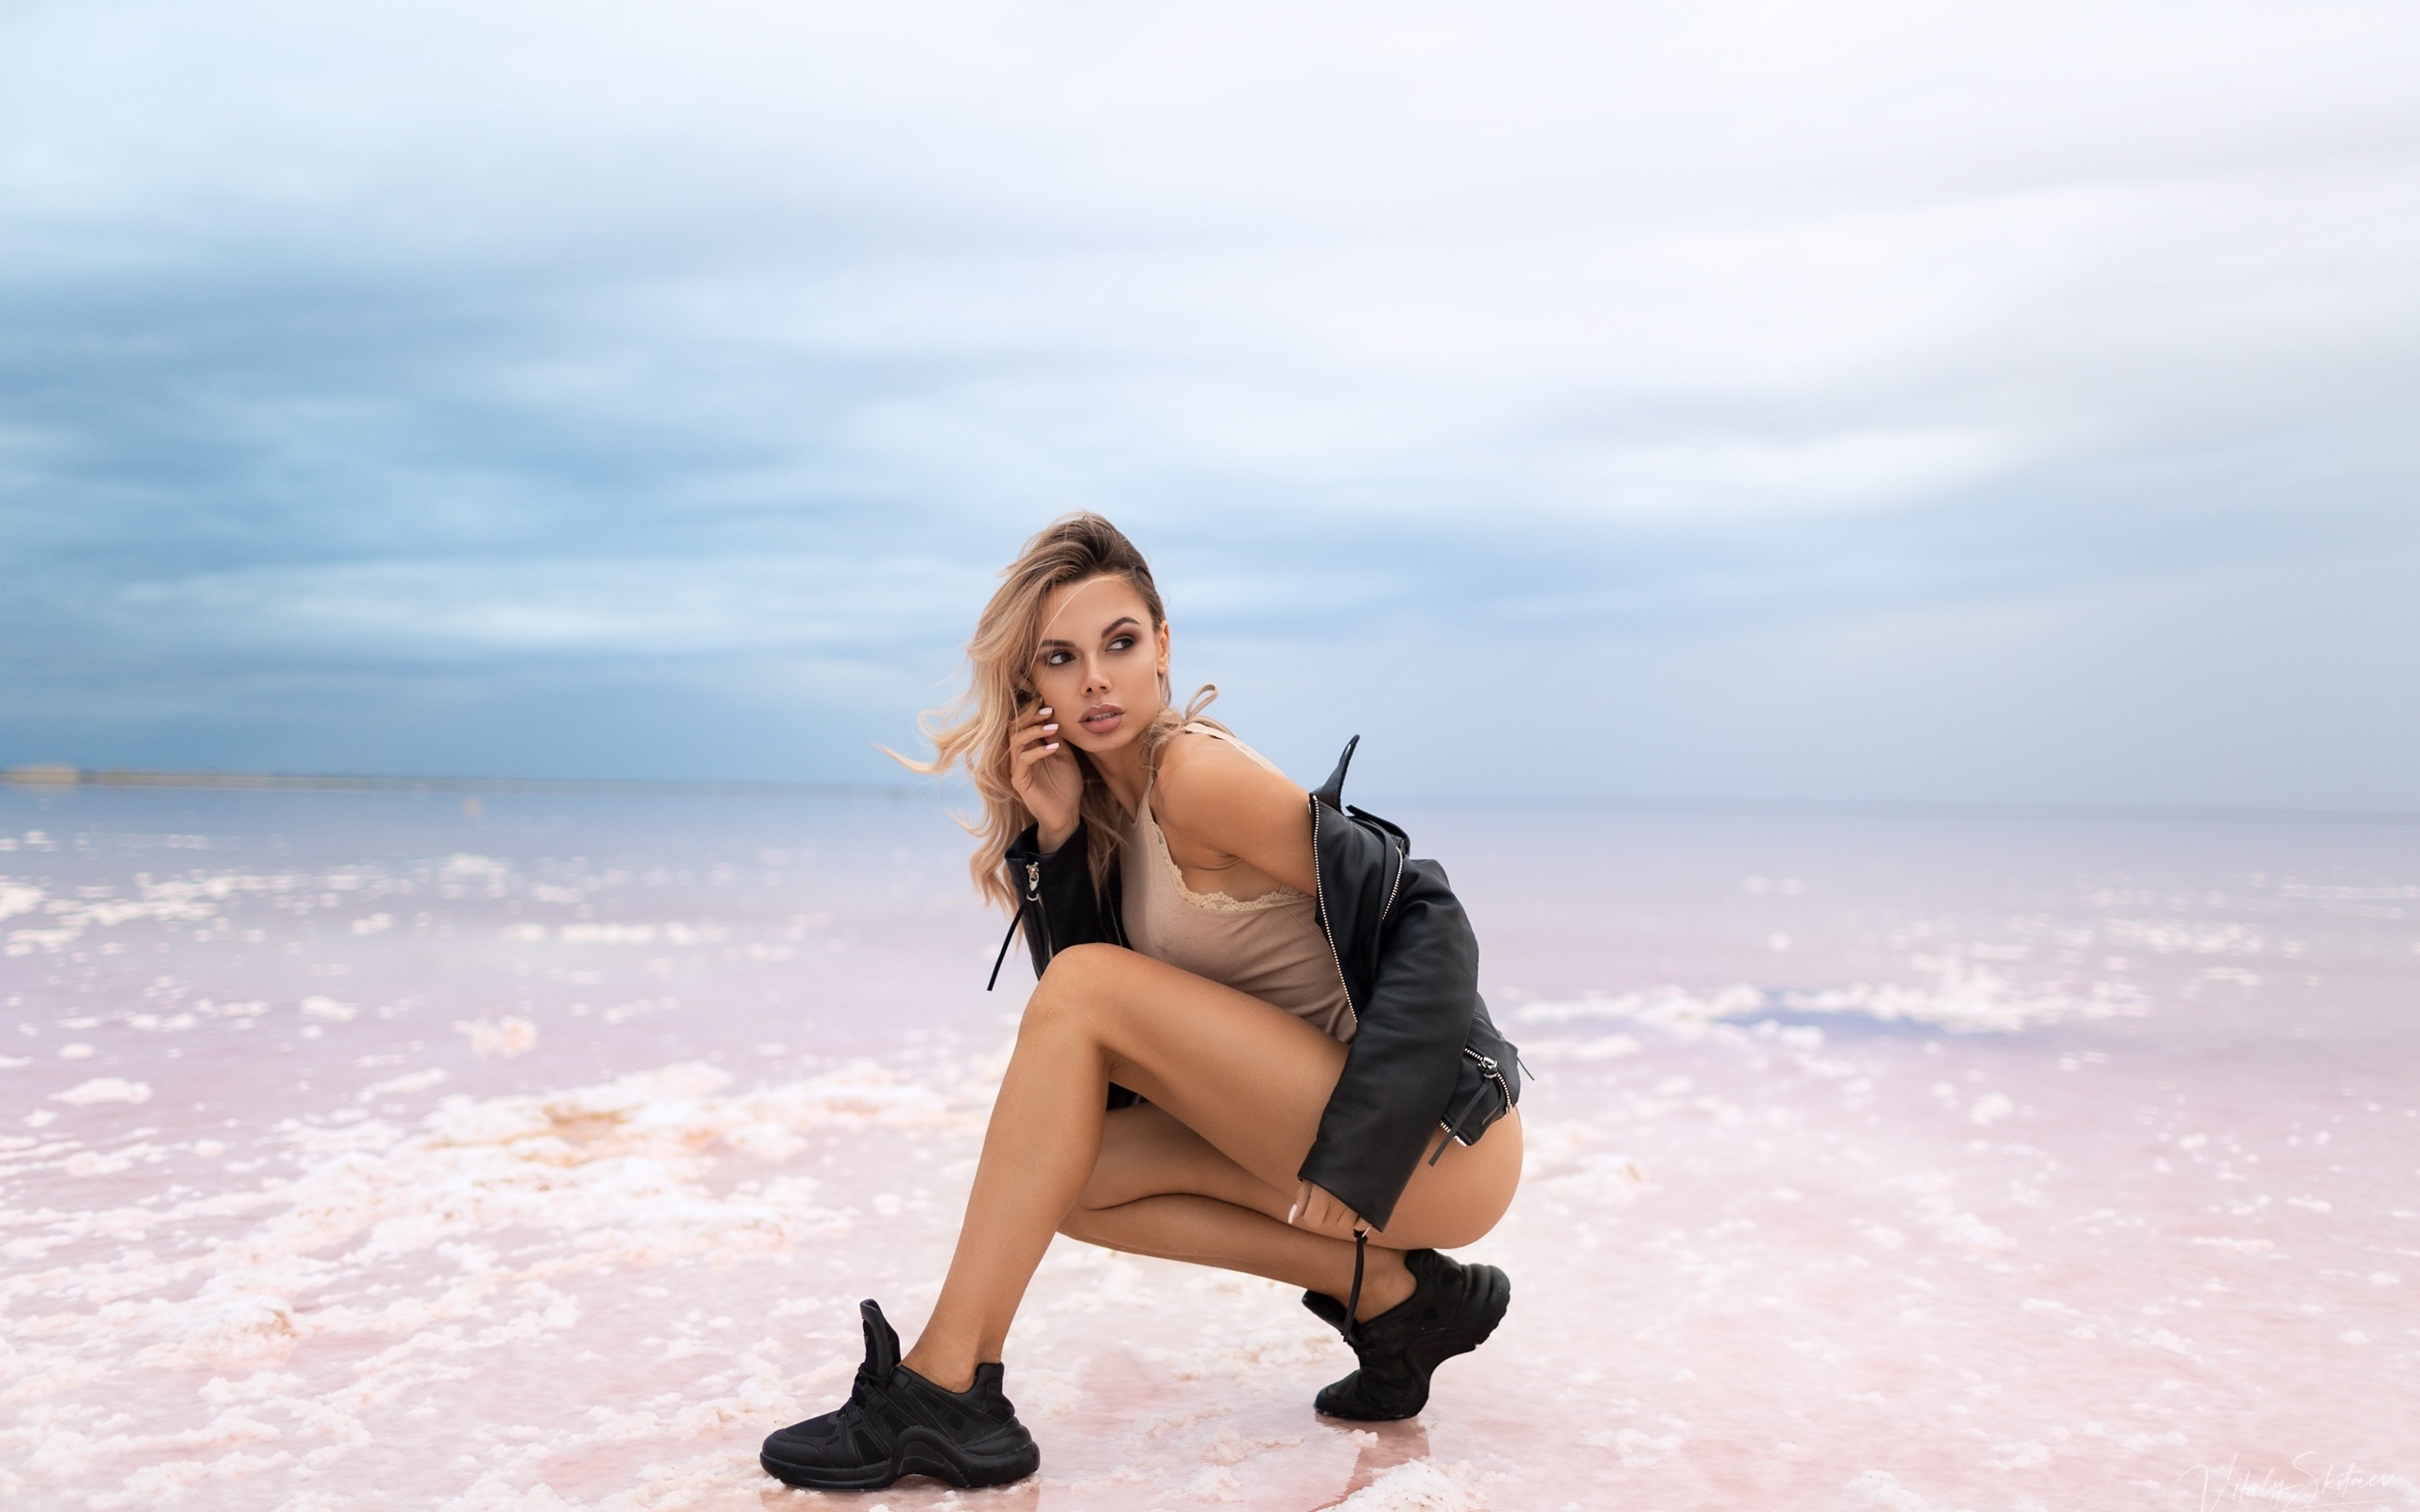 women, vitaly skitaev, squatting, leather jackets, sneakers, brunette, ass, women outdoors, pink nails, nipple through clothing, water